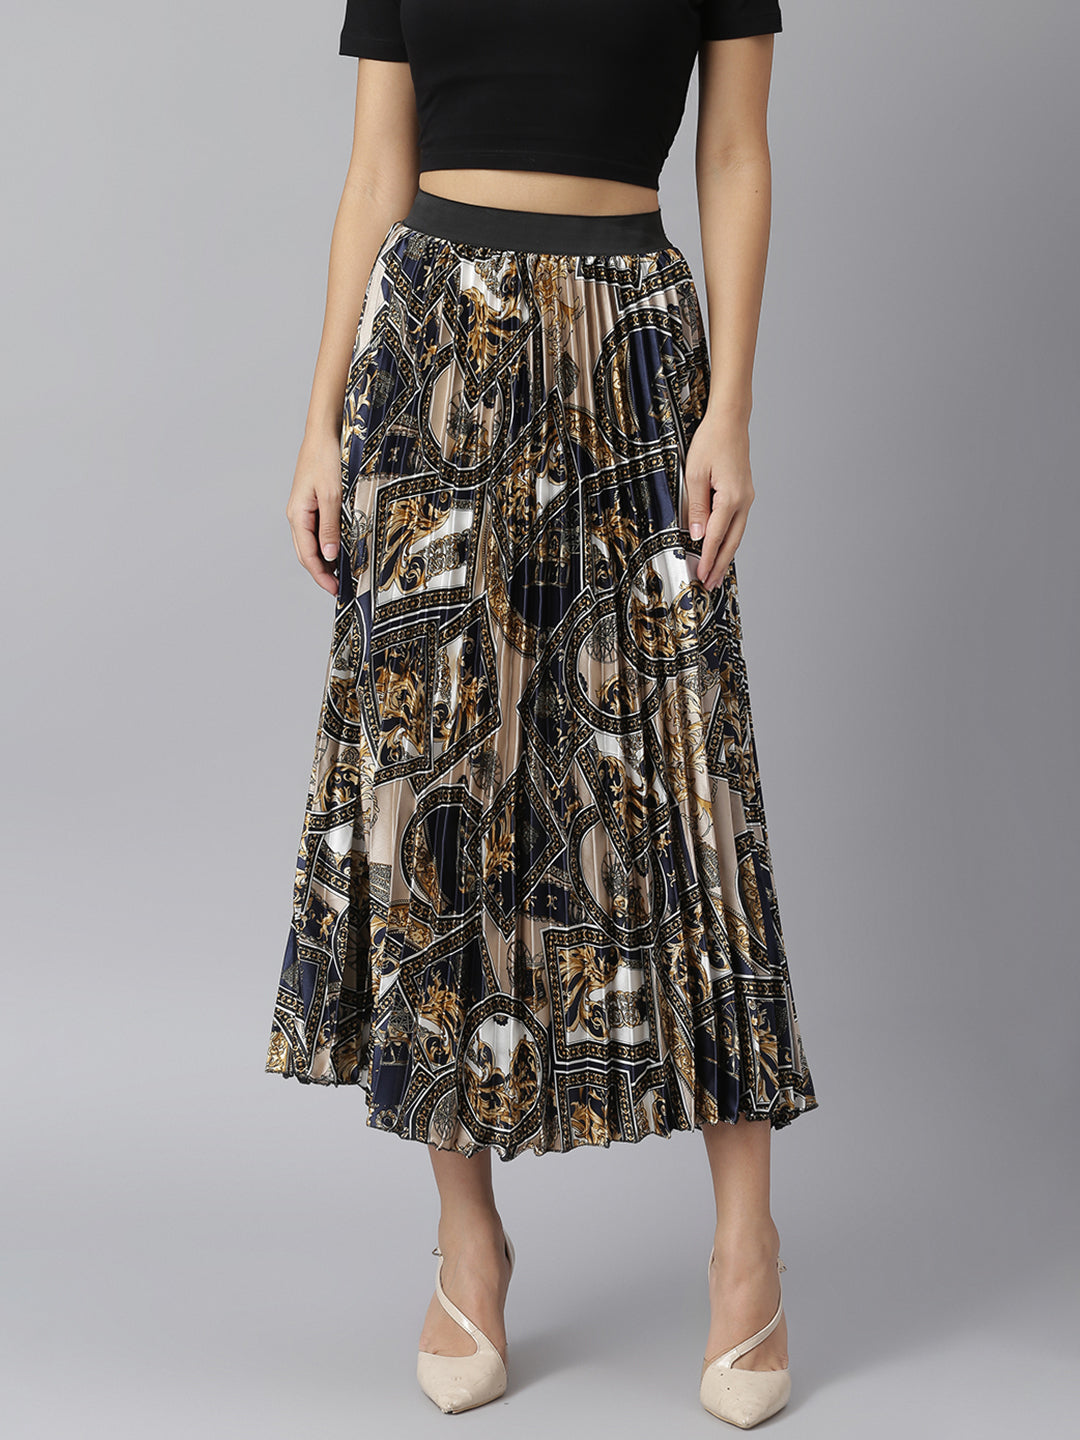 Women's pleated skirt with chain Print